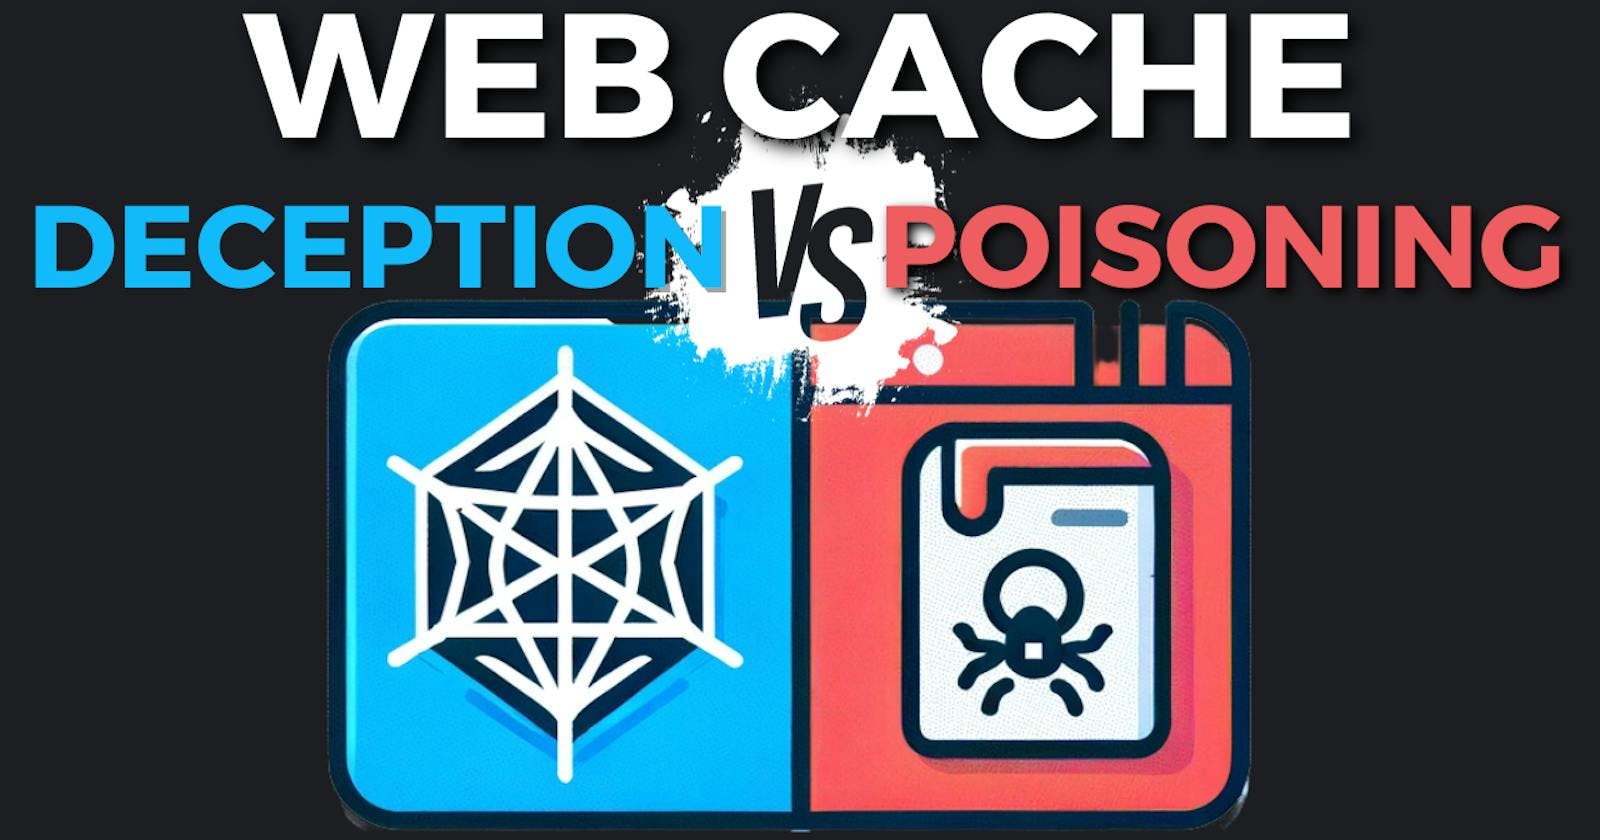 Demystifying Web Cache Deception and Web Cache Poisoning